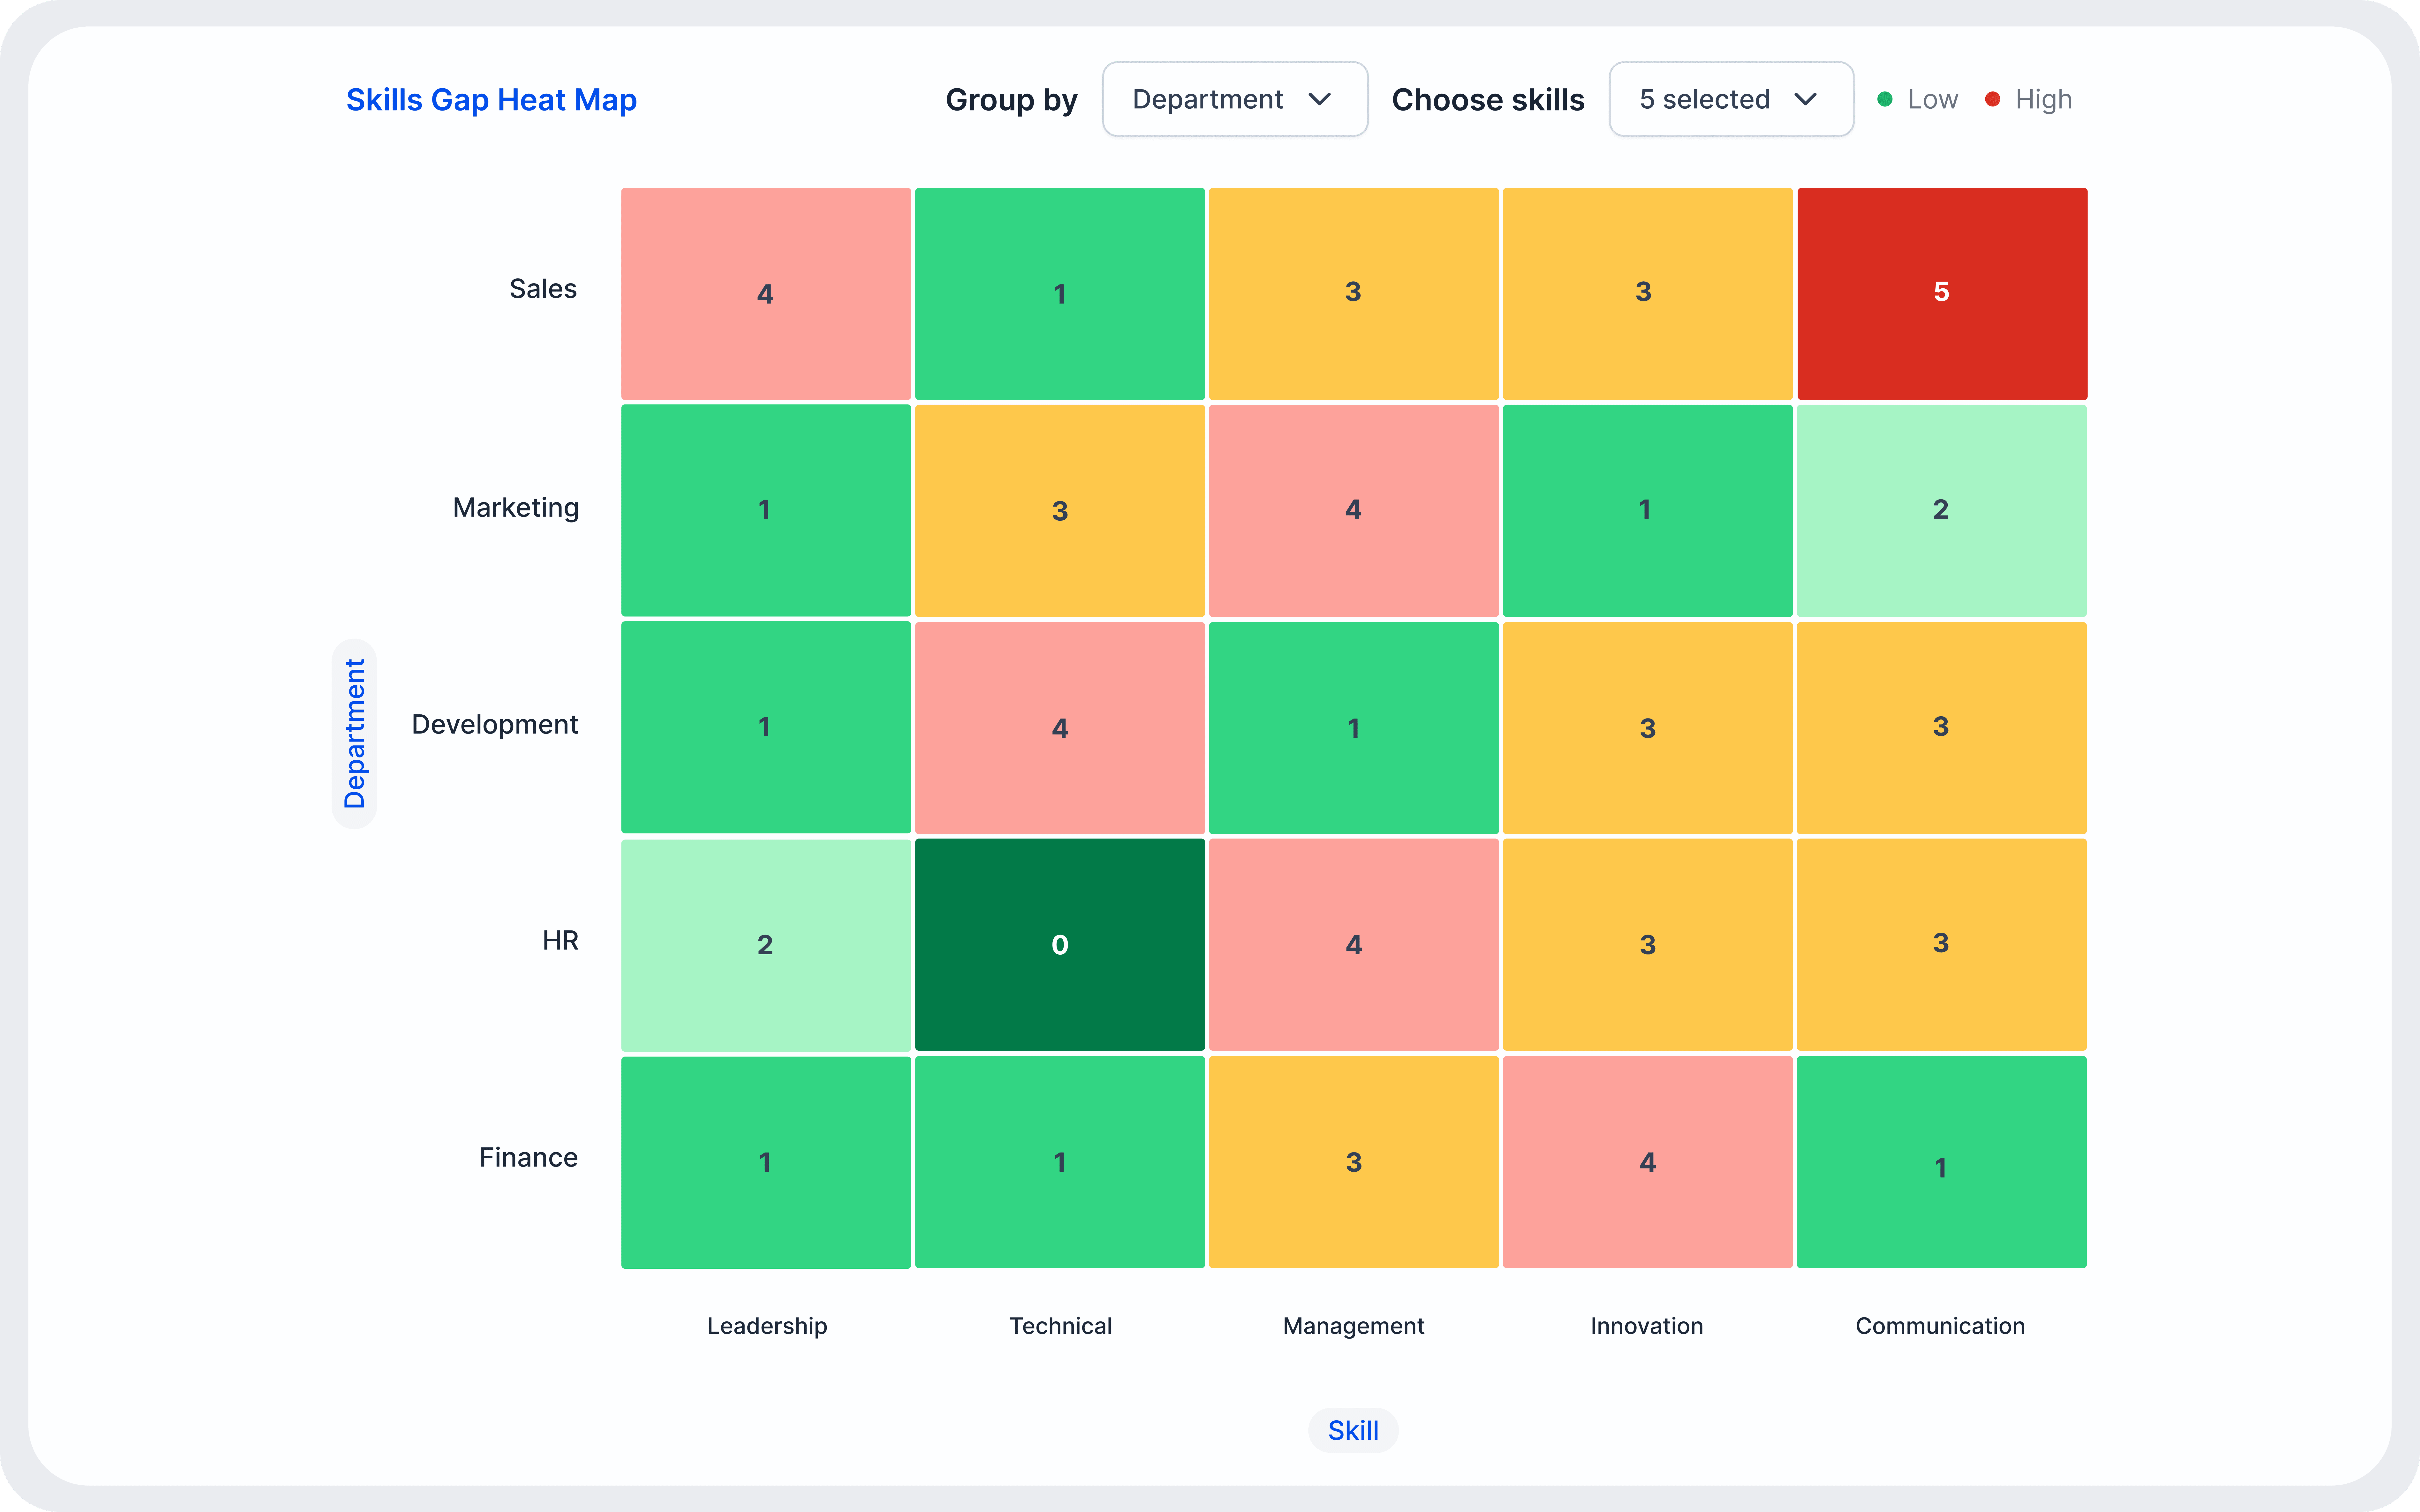 Set skill targets and identify gaps with this heat map